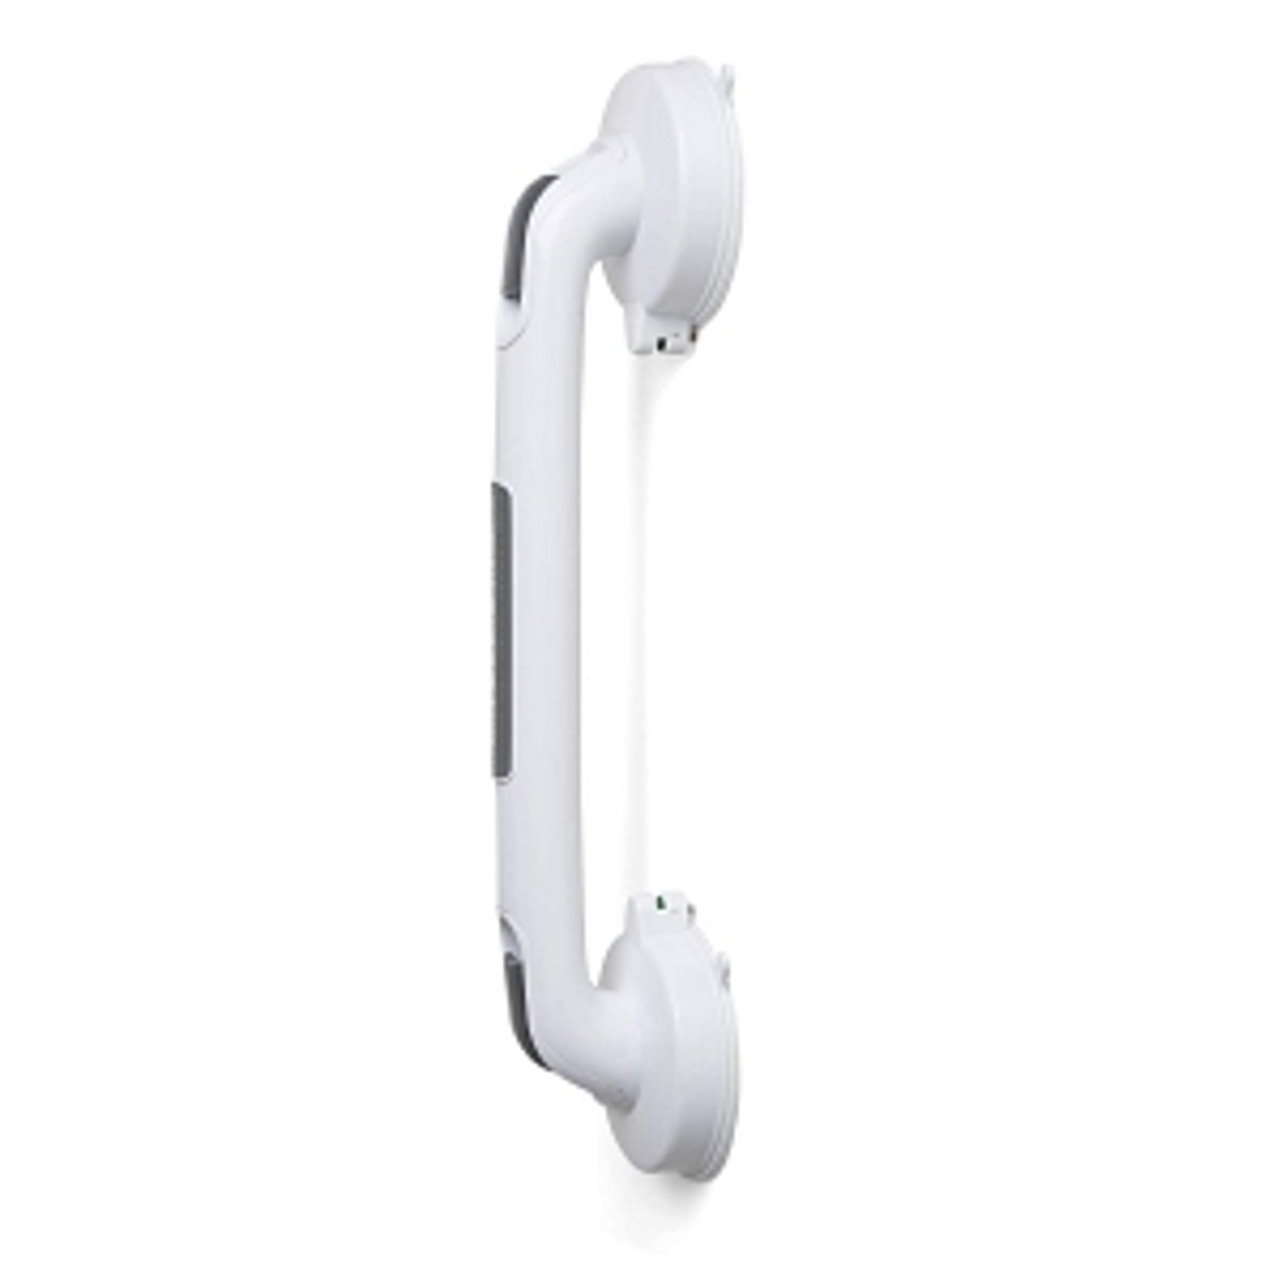 Aids balance in the shower
Stays in place with suction cups
Locking indicator shows that the grab bar is secured
250 lb. weight capacity
Comes in retail packaging